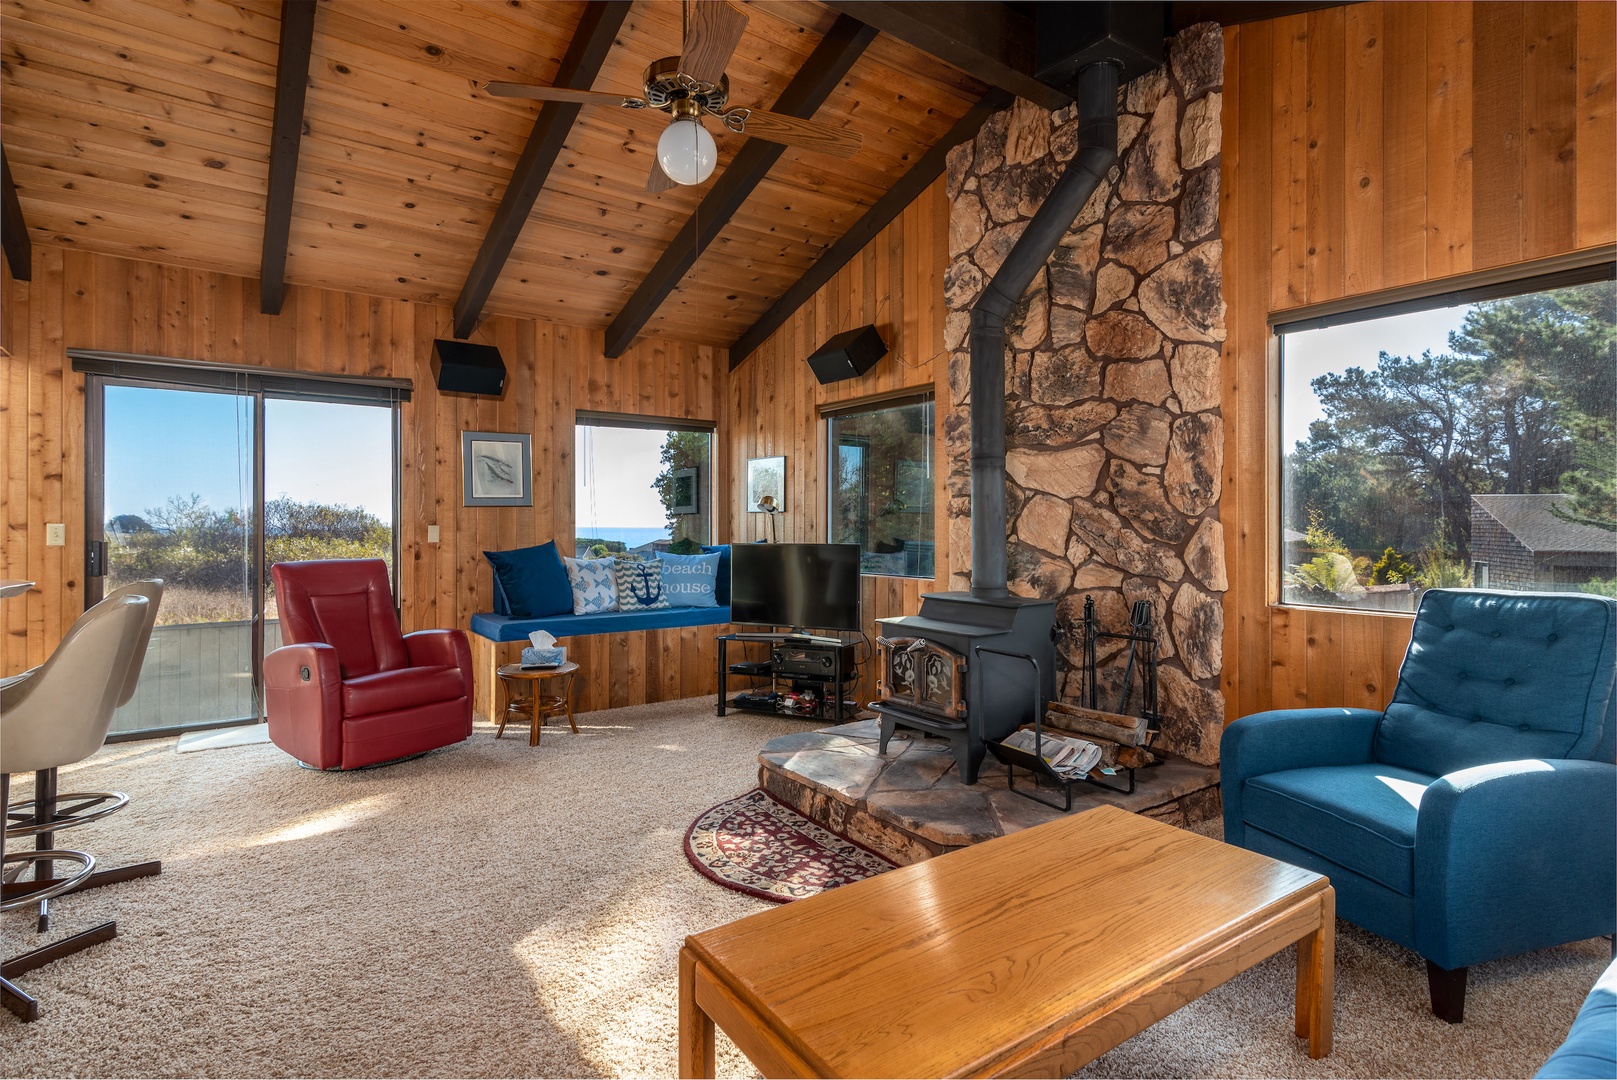 Cozy living room with wood stove fireplace & TV